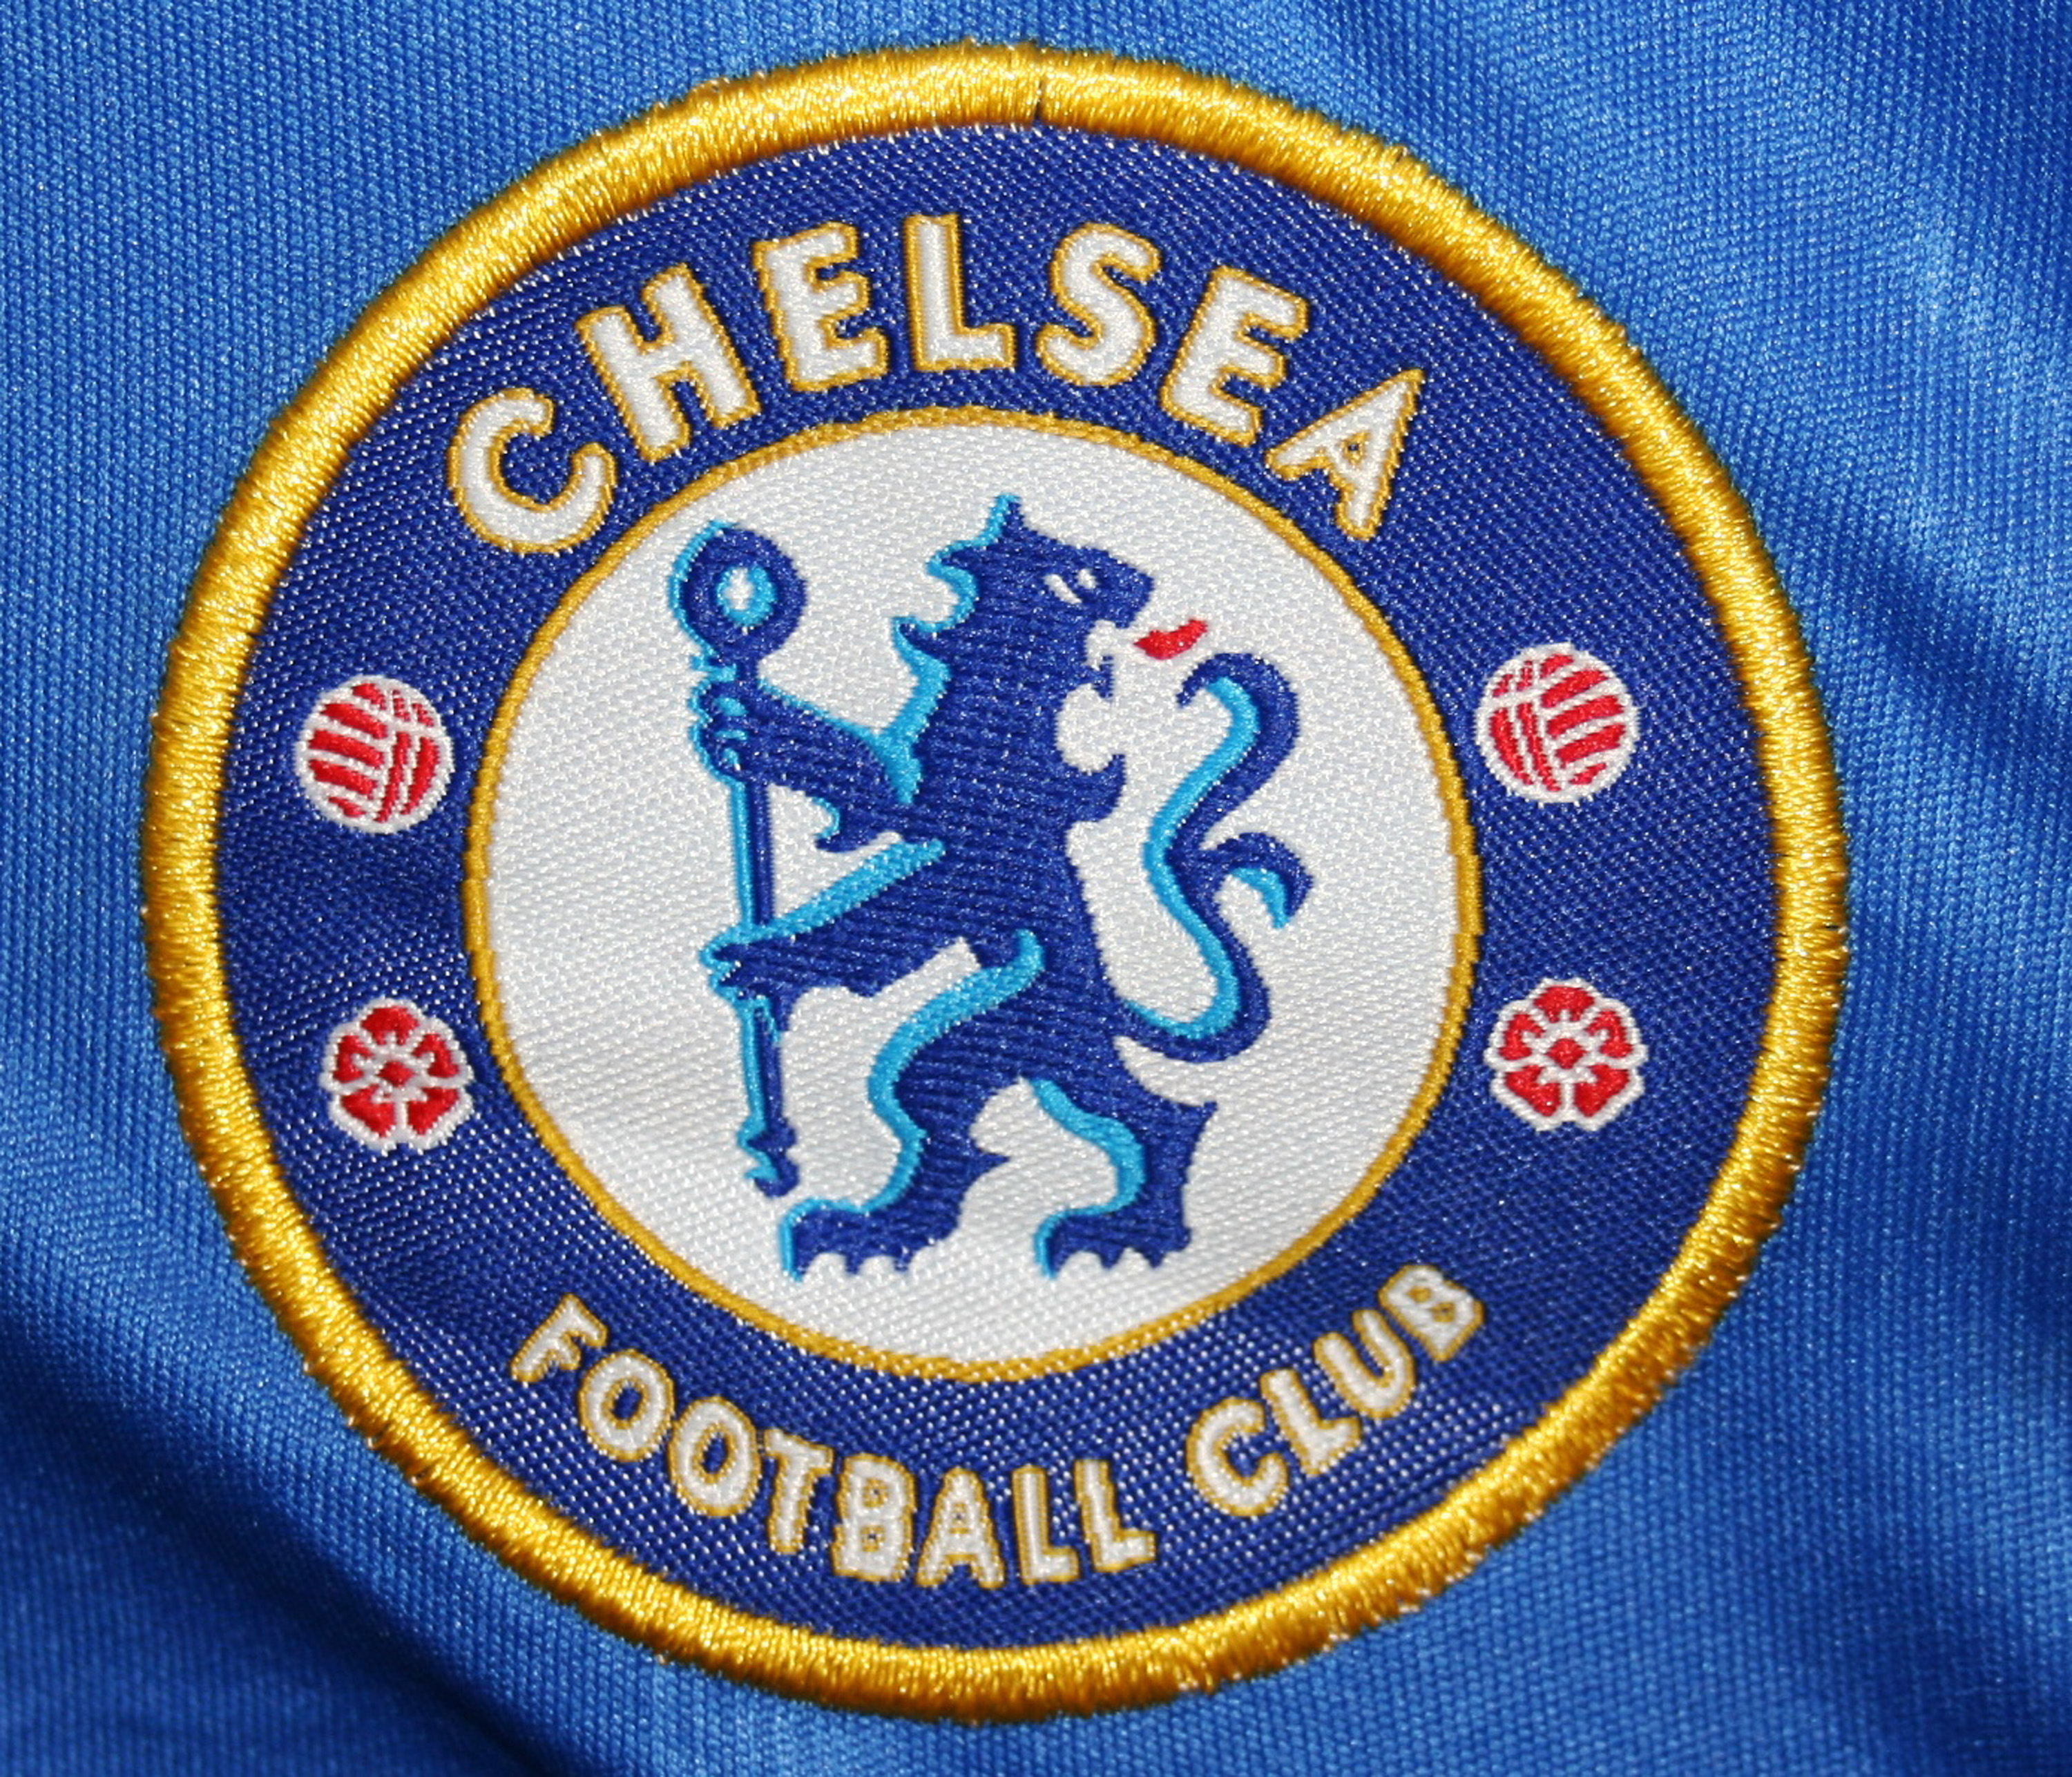 Chelsea challenges FIFA transfer ban at sports court